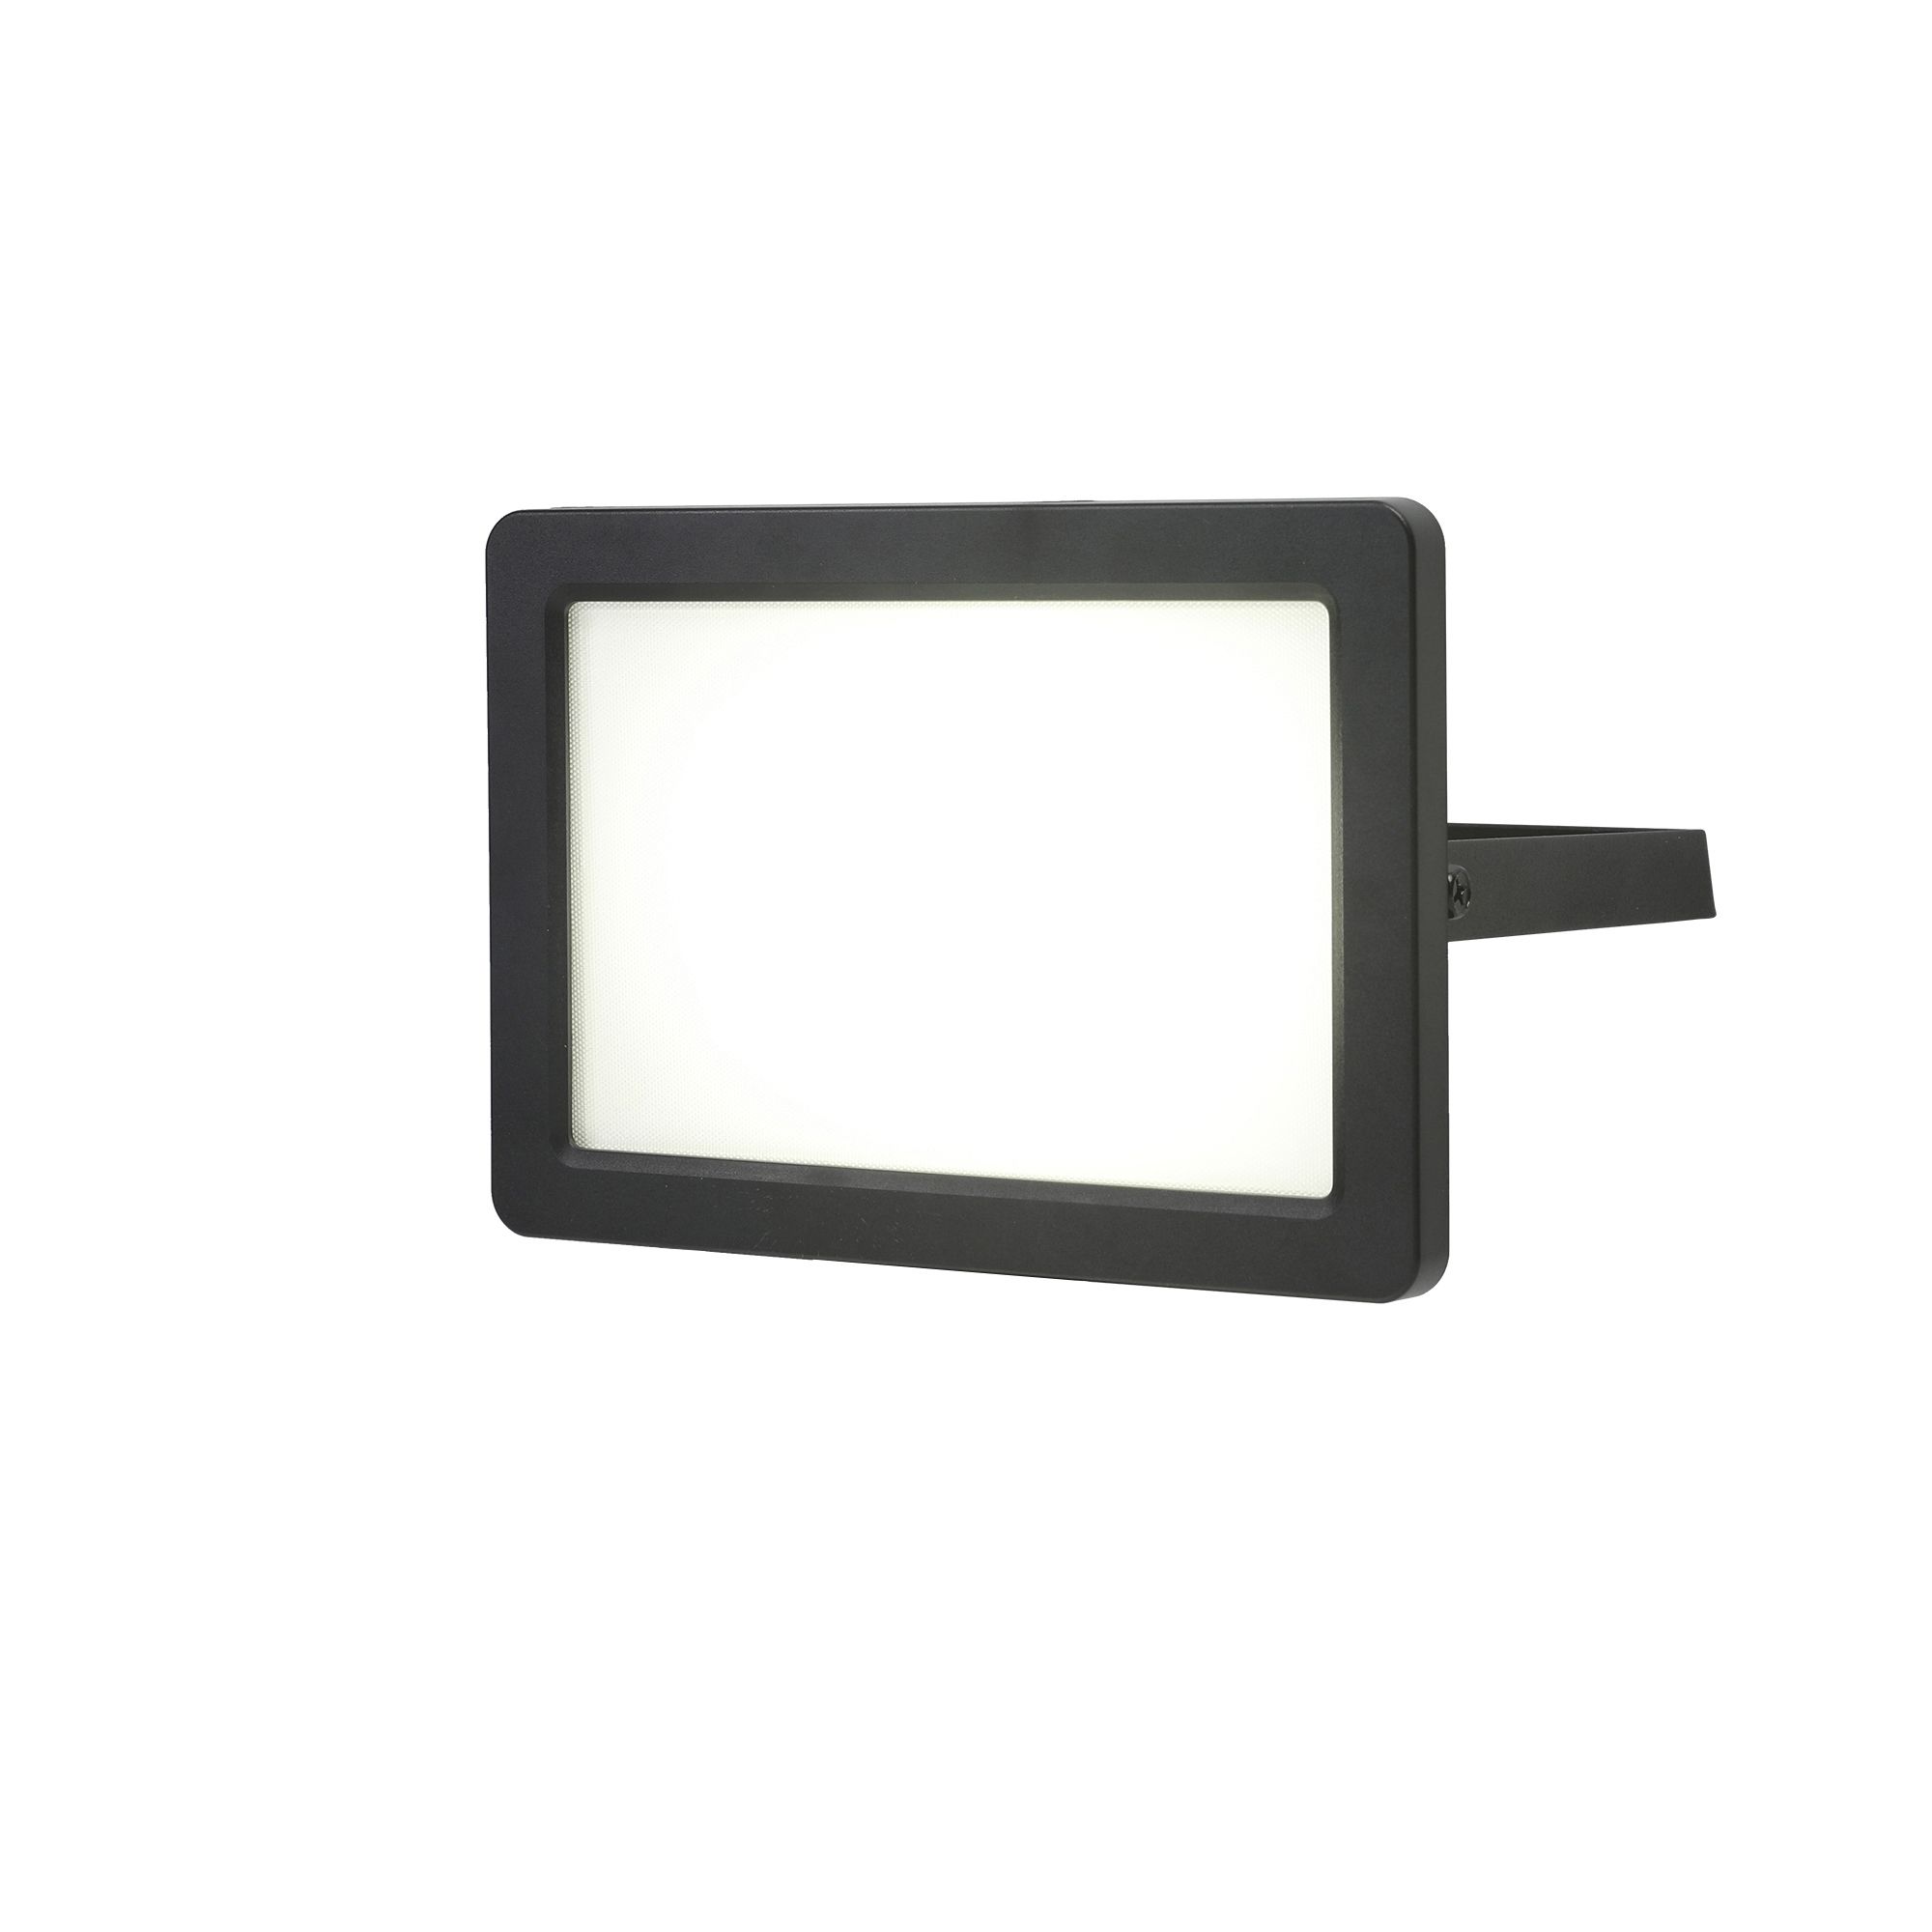 GoodHome Lucan AFD1019-NB Black Mains-powered Cool white LED Without sensor Floodlight 3000lm